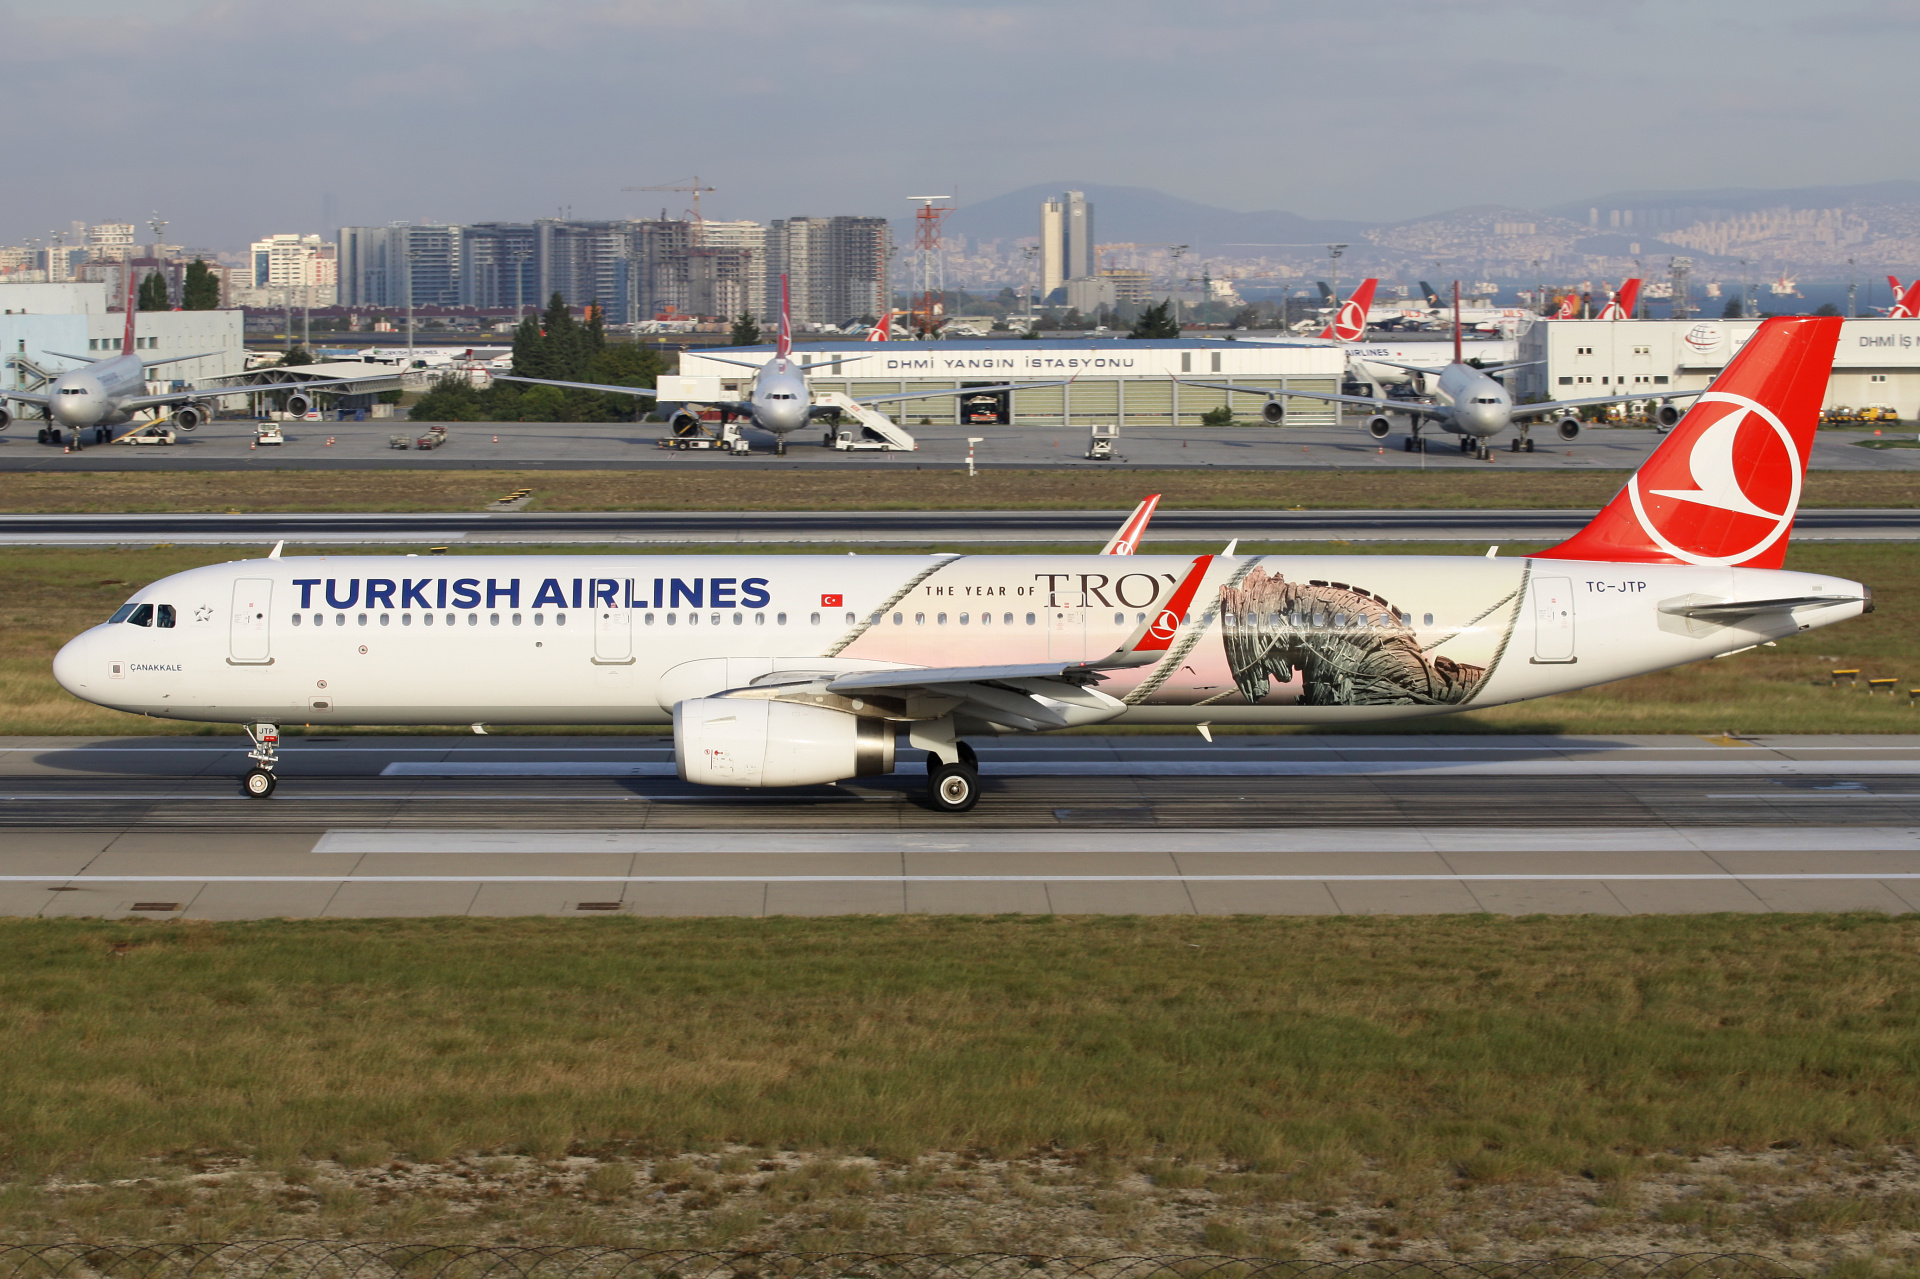 TC-JTP (The Year of Troy livery) (Aircraft » Istanbul Atatürk Airport » Airbus A321-200 » THY Turkish Airlines)